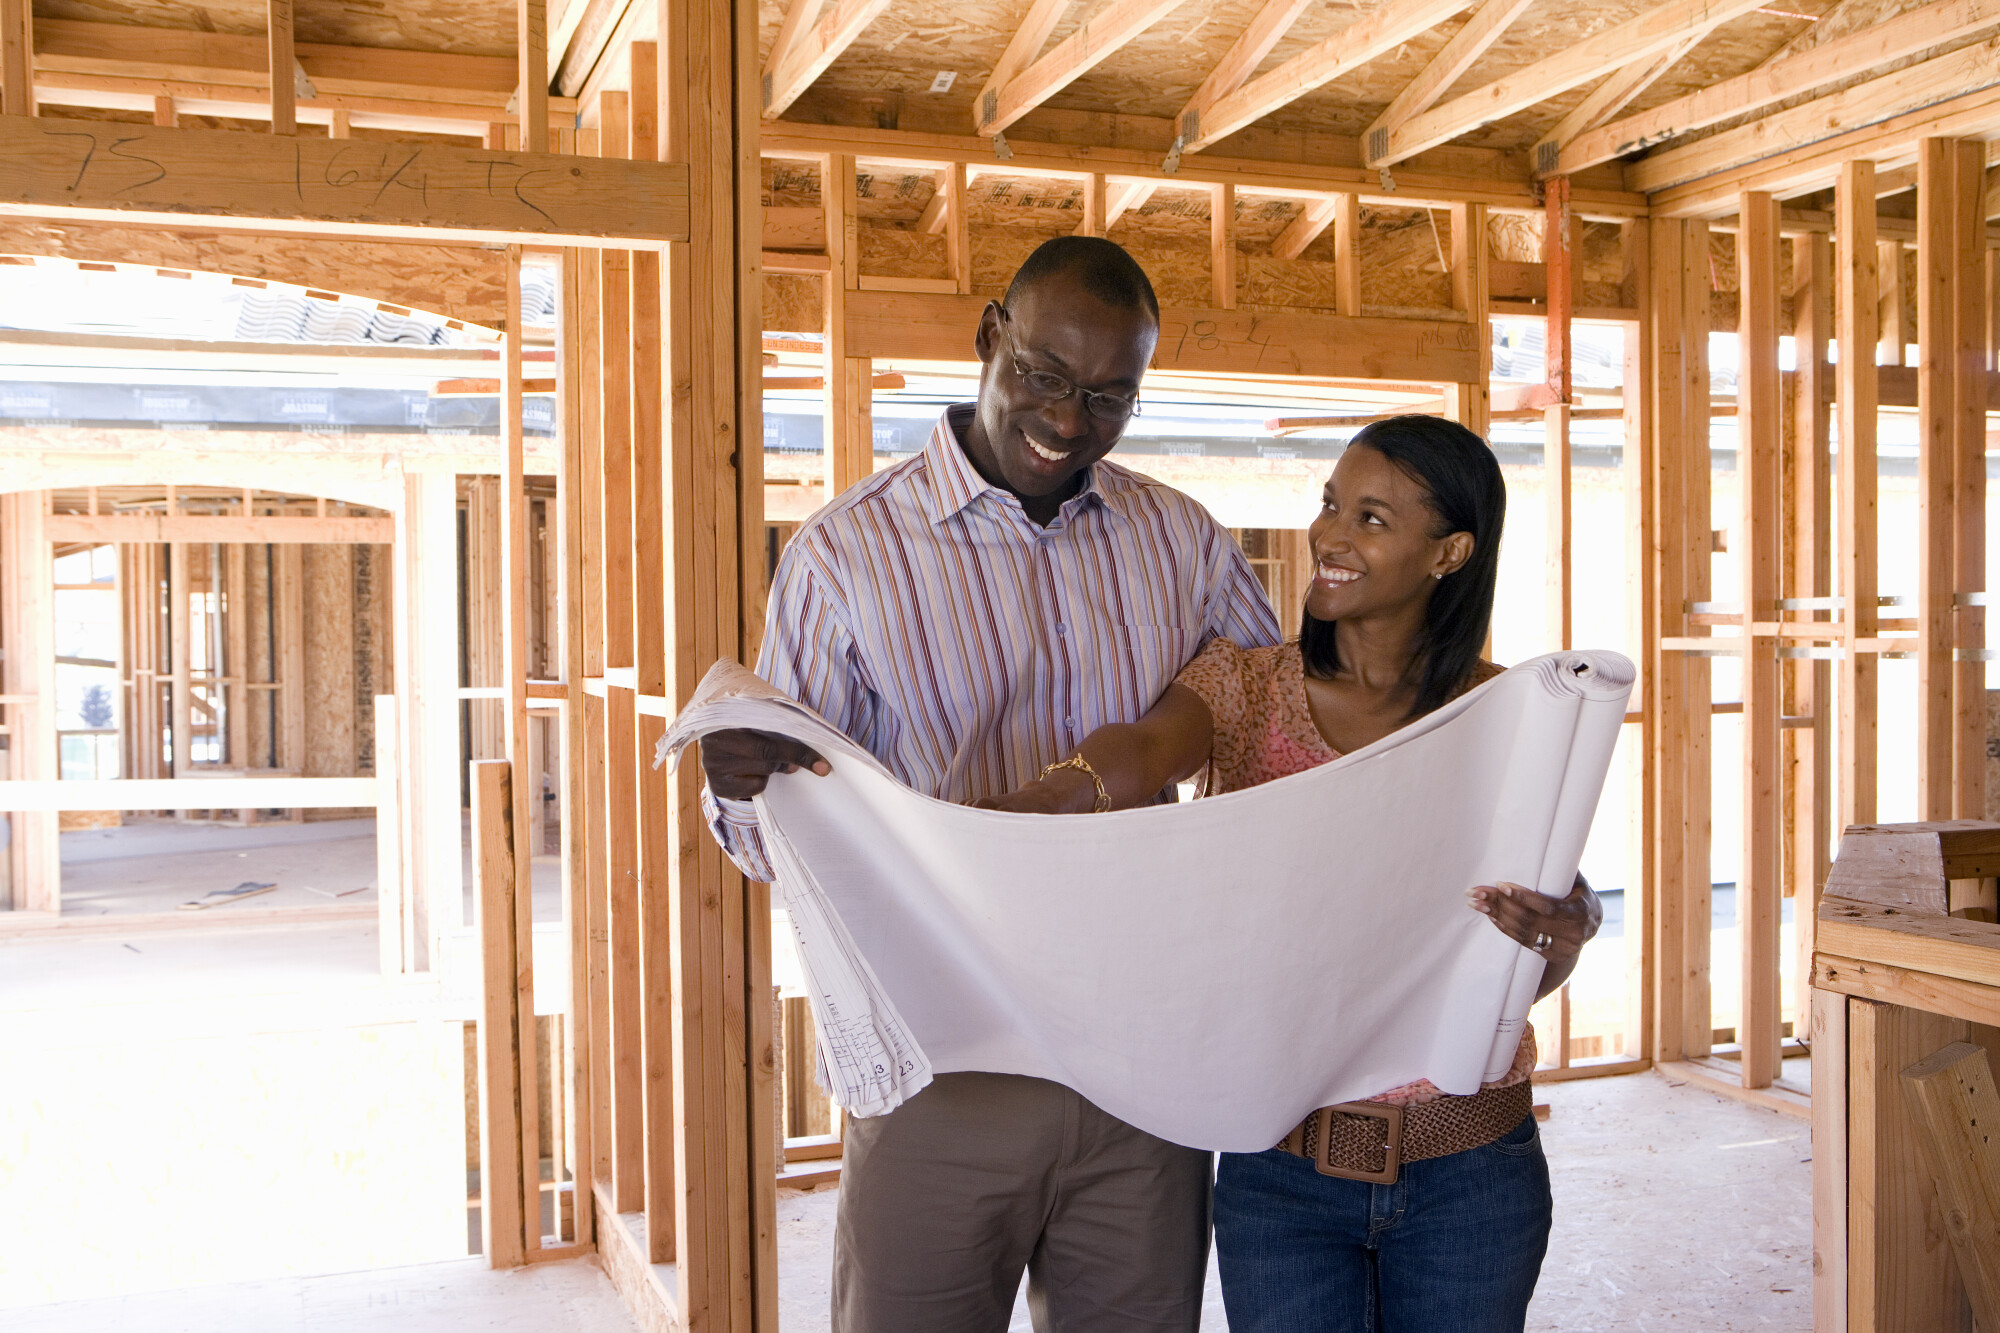 Building your dream home is a process. Here are a few important home design tips to keep in mind when designing your home.